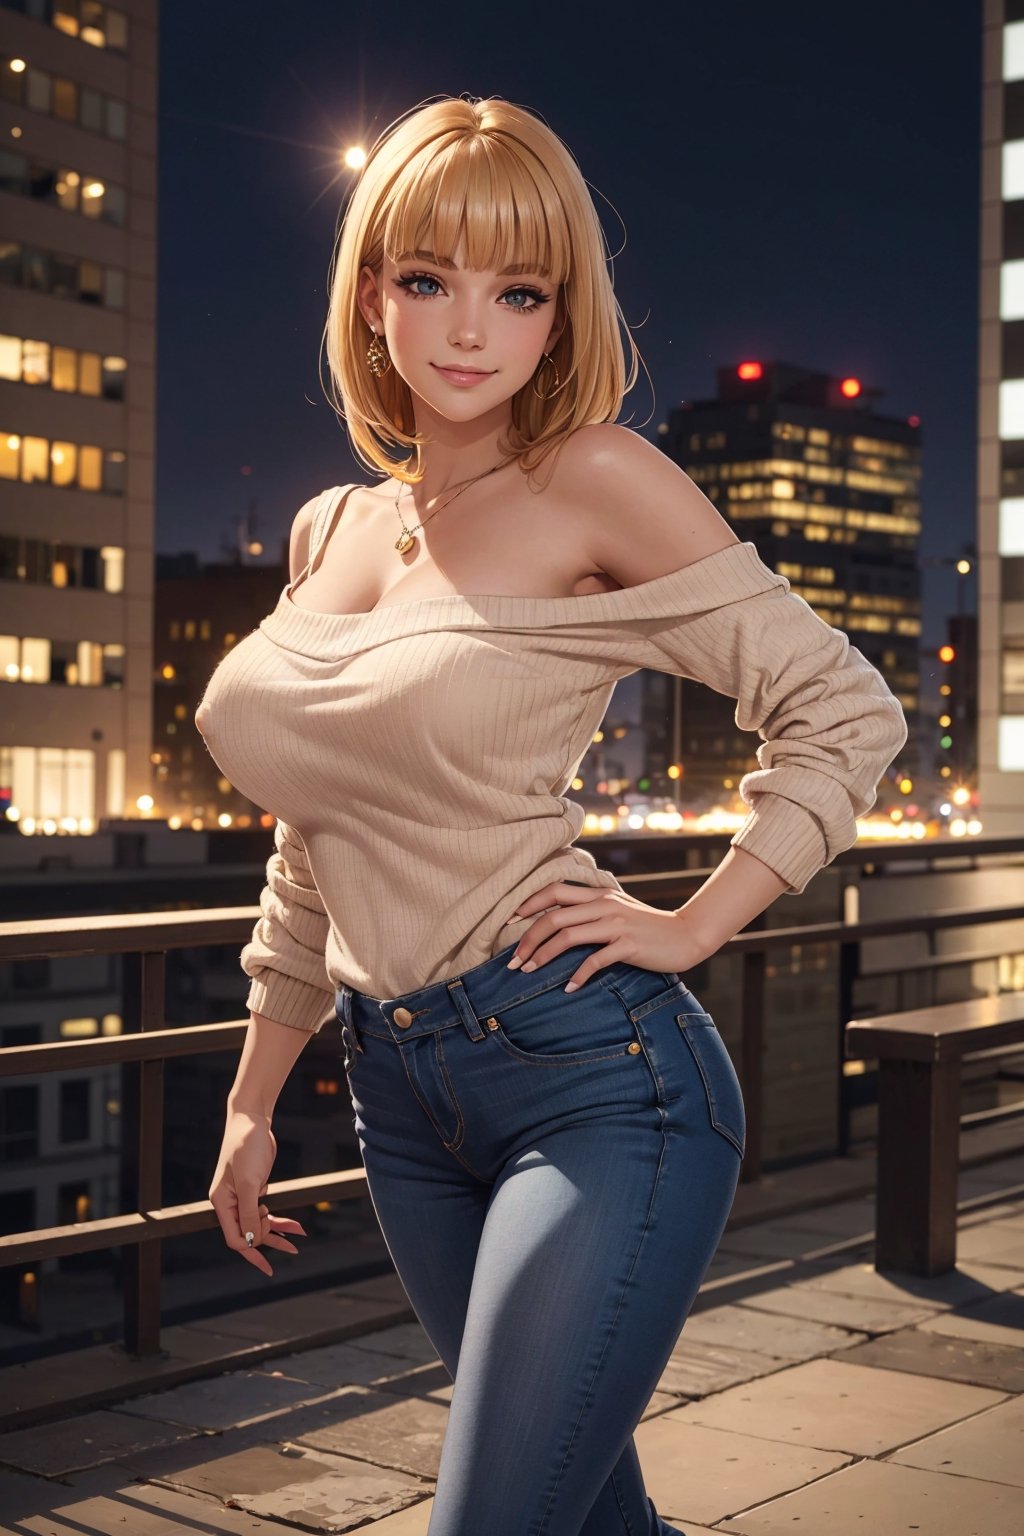 evening, graceful photo of a girl in jeans, sweater, stilettos,  (puffy eyes:1.05), straight strawberry blonde hair, (long:1.4), blunt bangs, smile slightly, happy, happiness, high detailed skin, skin pores, stunning innocent symmetry face, long eyelashes, black eyeliner, black eyeshadow,(standing), emotional, city, masterpiece, best quality, photorealistic,  massive breasts,Looking over the shoulder pose, nipple_slip
